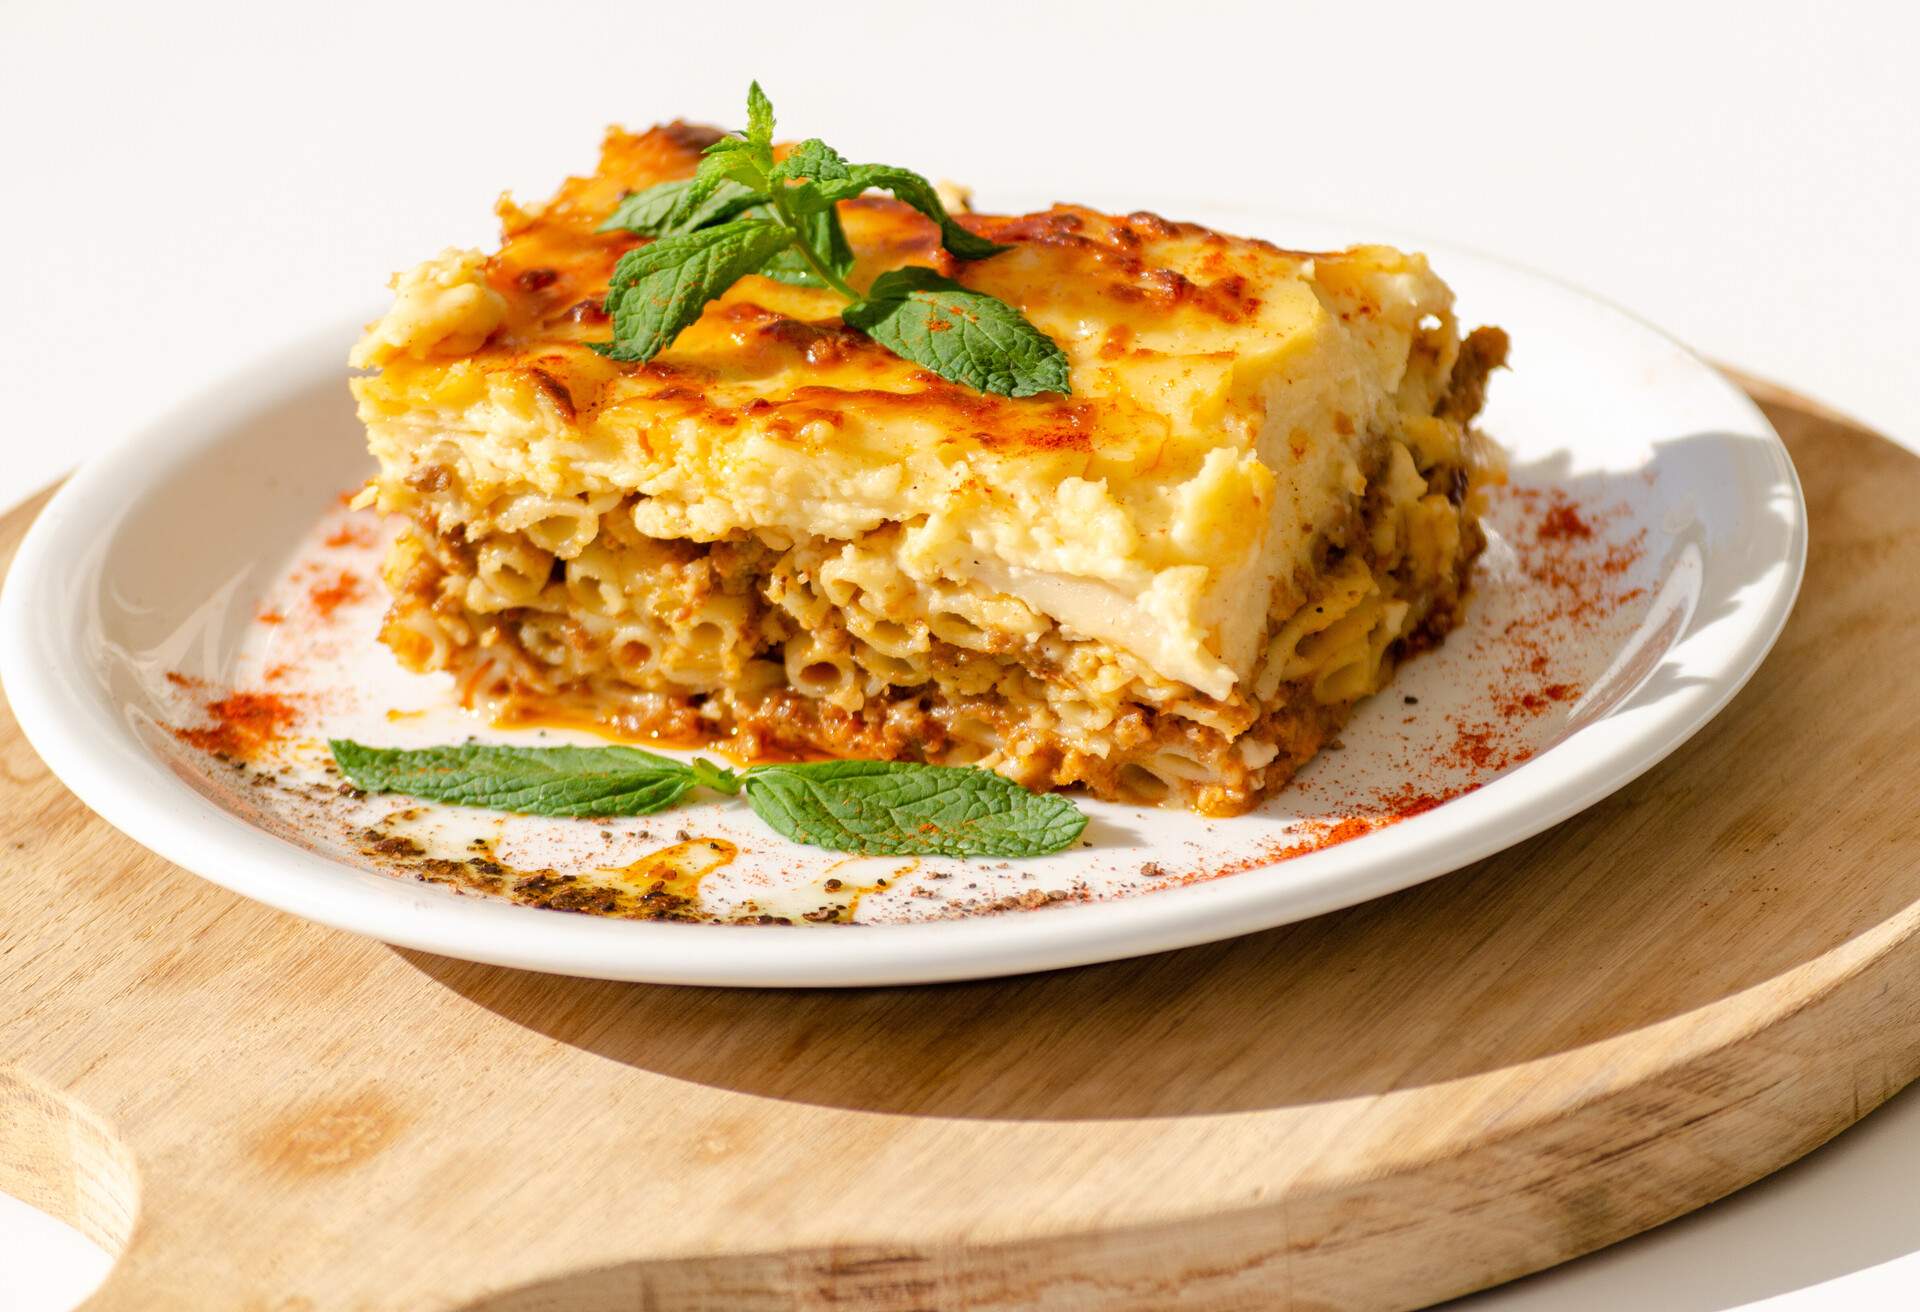 A portion of delicious pastitsio served on a plate